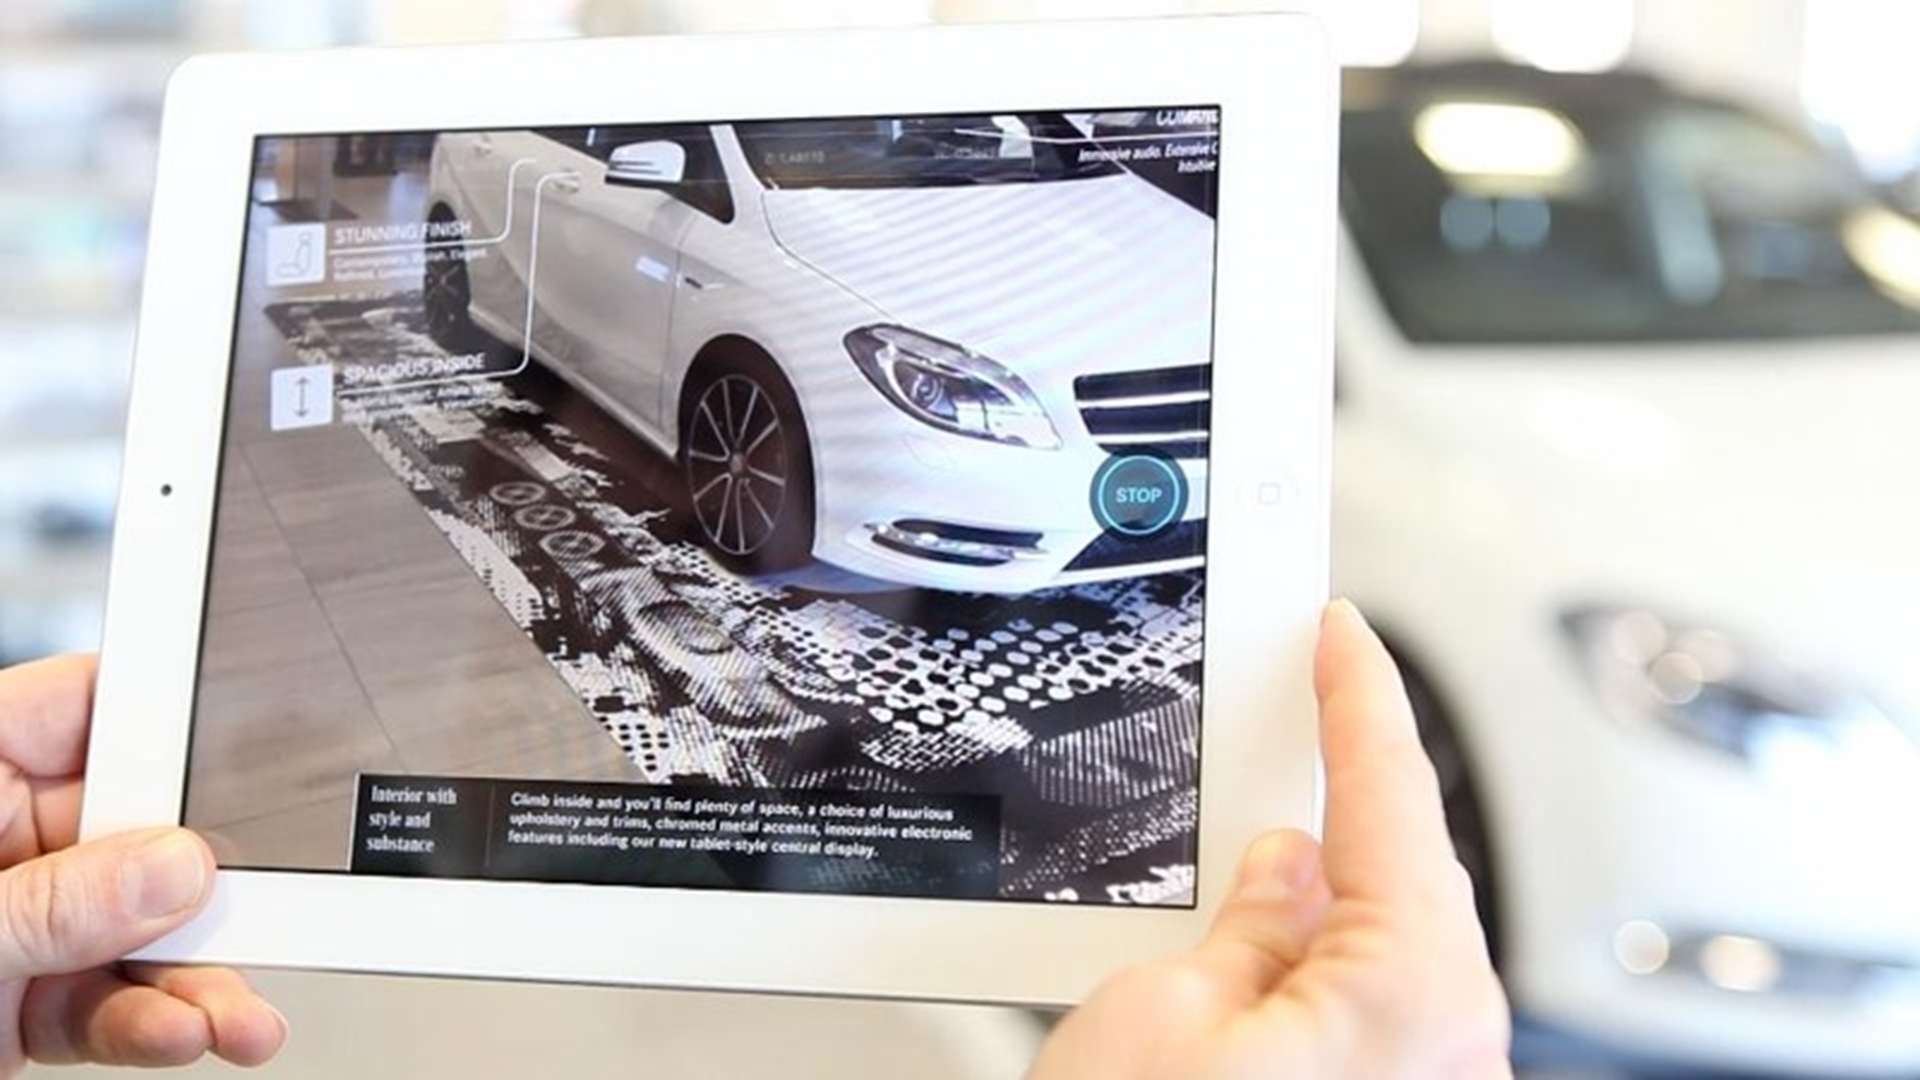 EXPLORE A NEW REALITY WITH THE MERCEDES-BENZ B-CLASS SHOWROOM APP